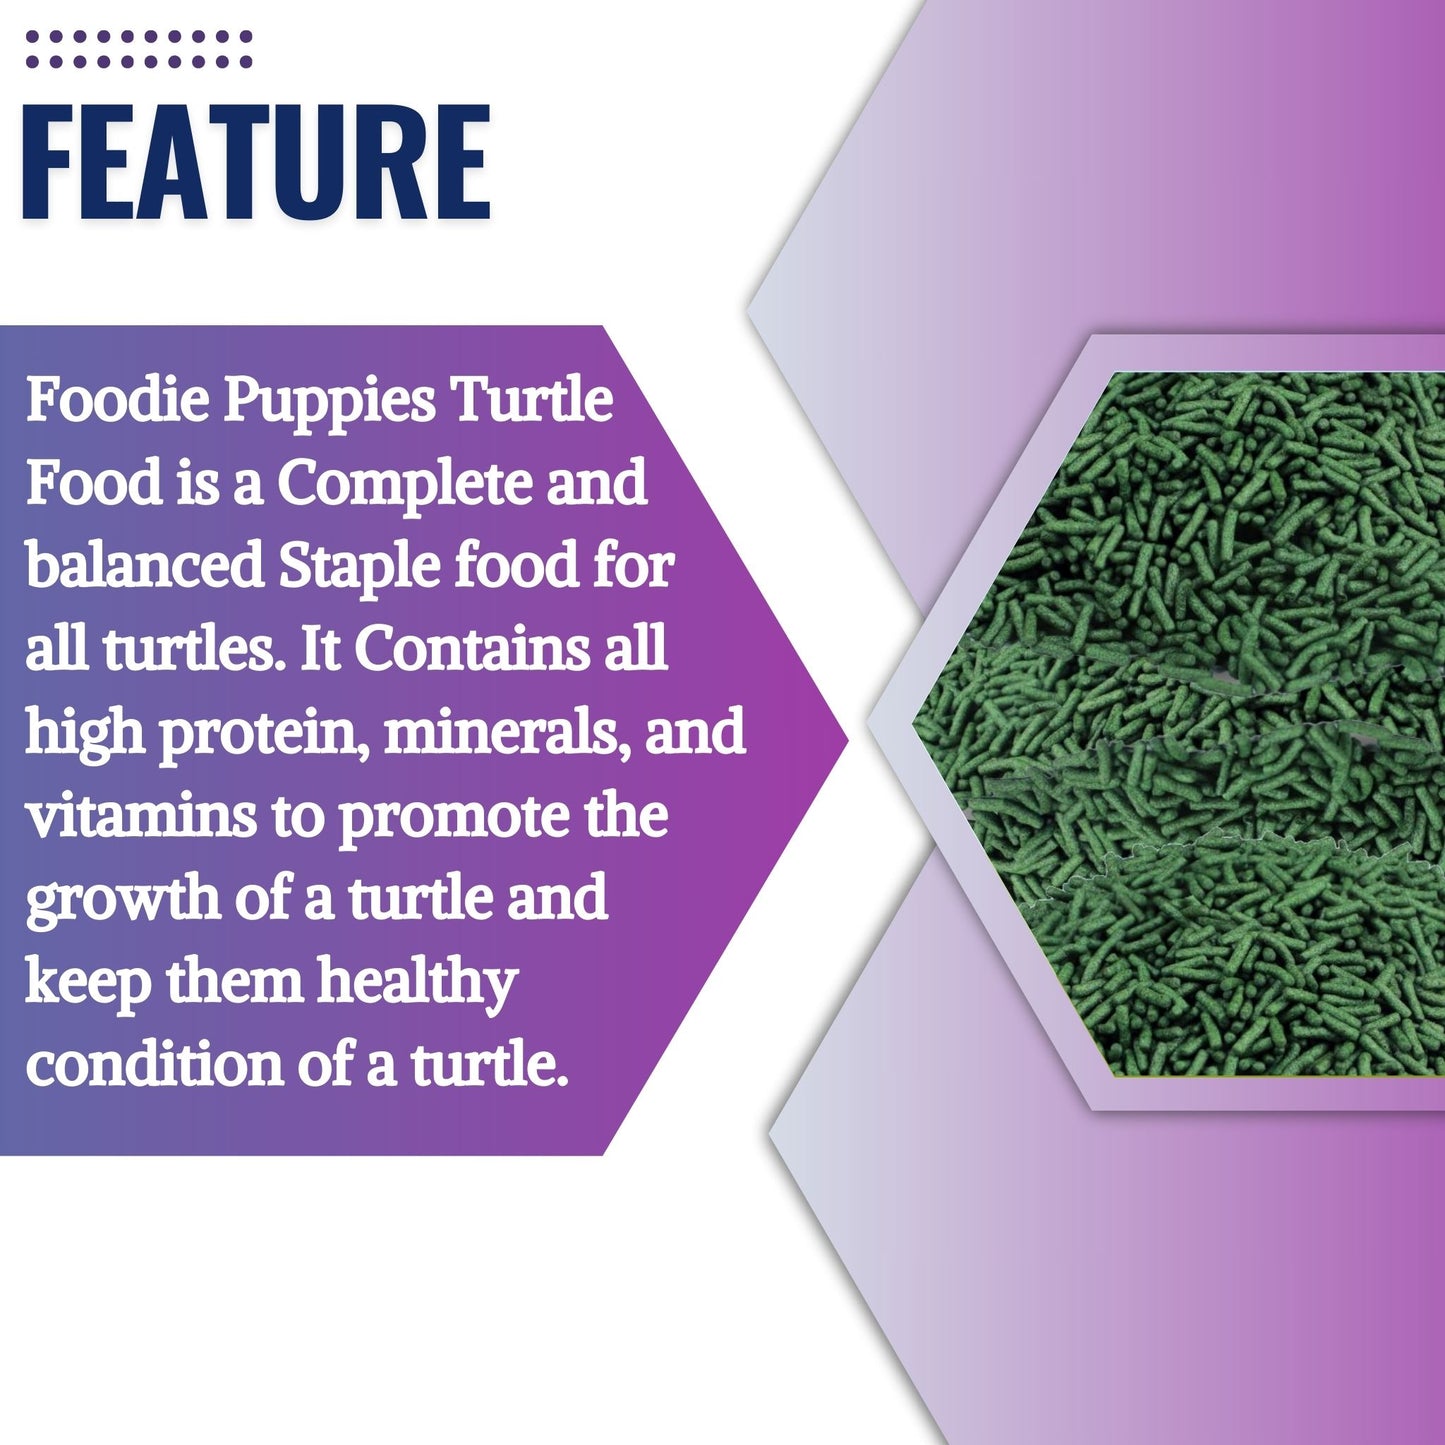 Foodie Puppies Turtle Food for Growth & Health - 2Kg (Pouch)